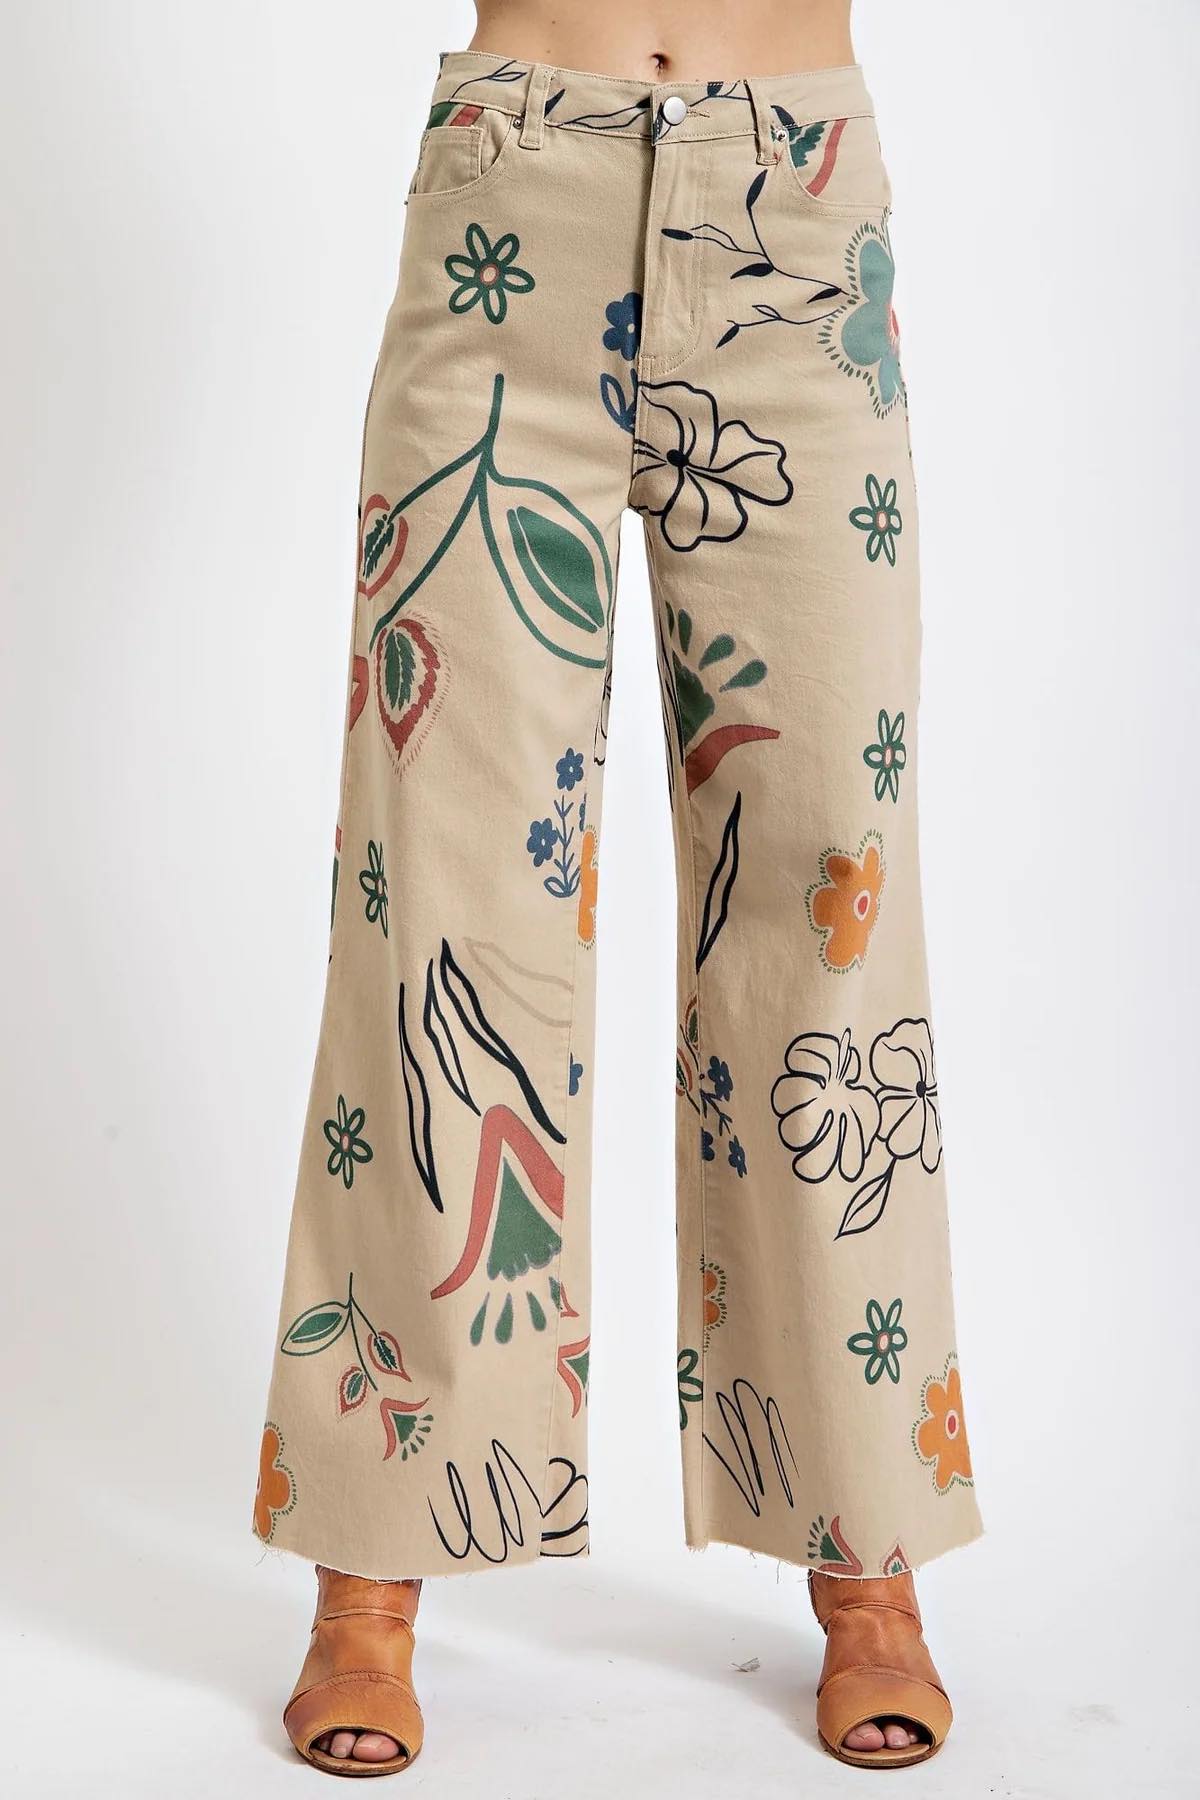 Show Stopper Printed Pants